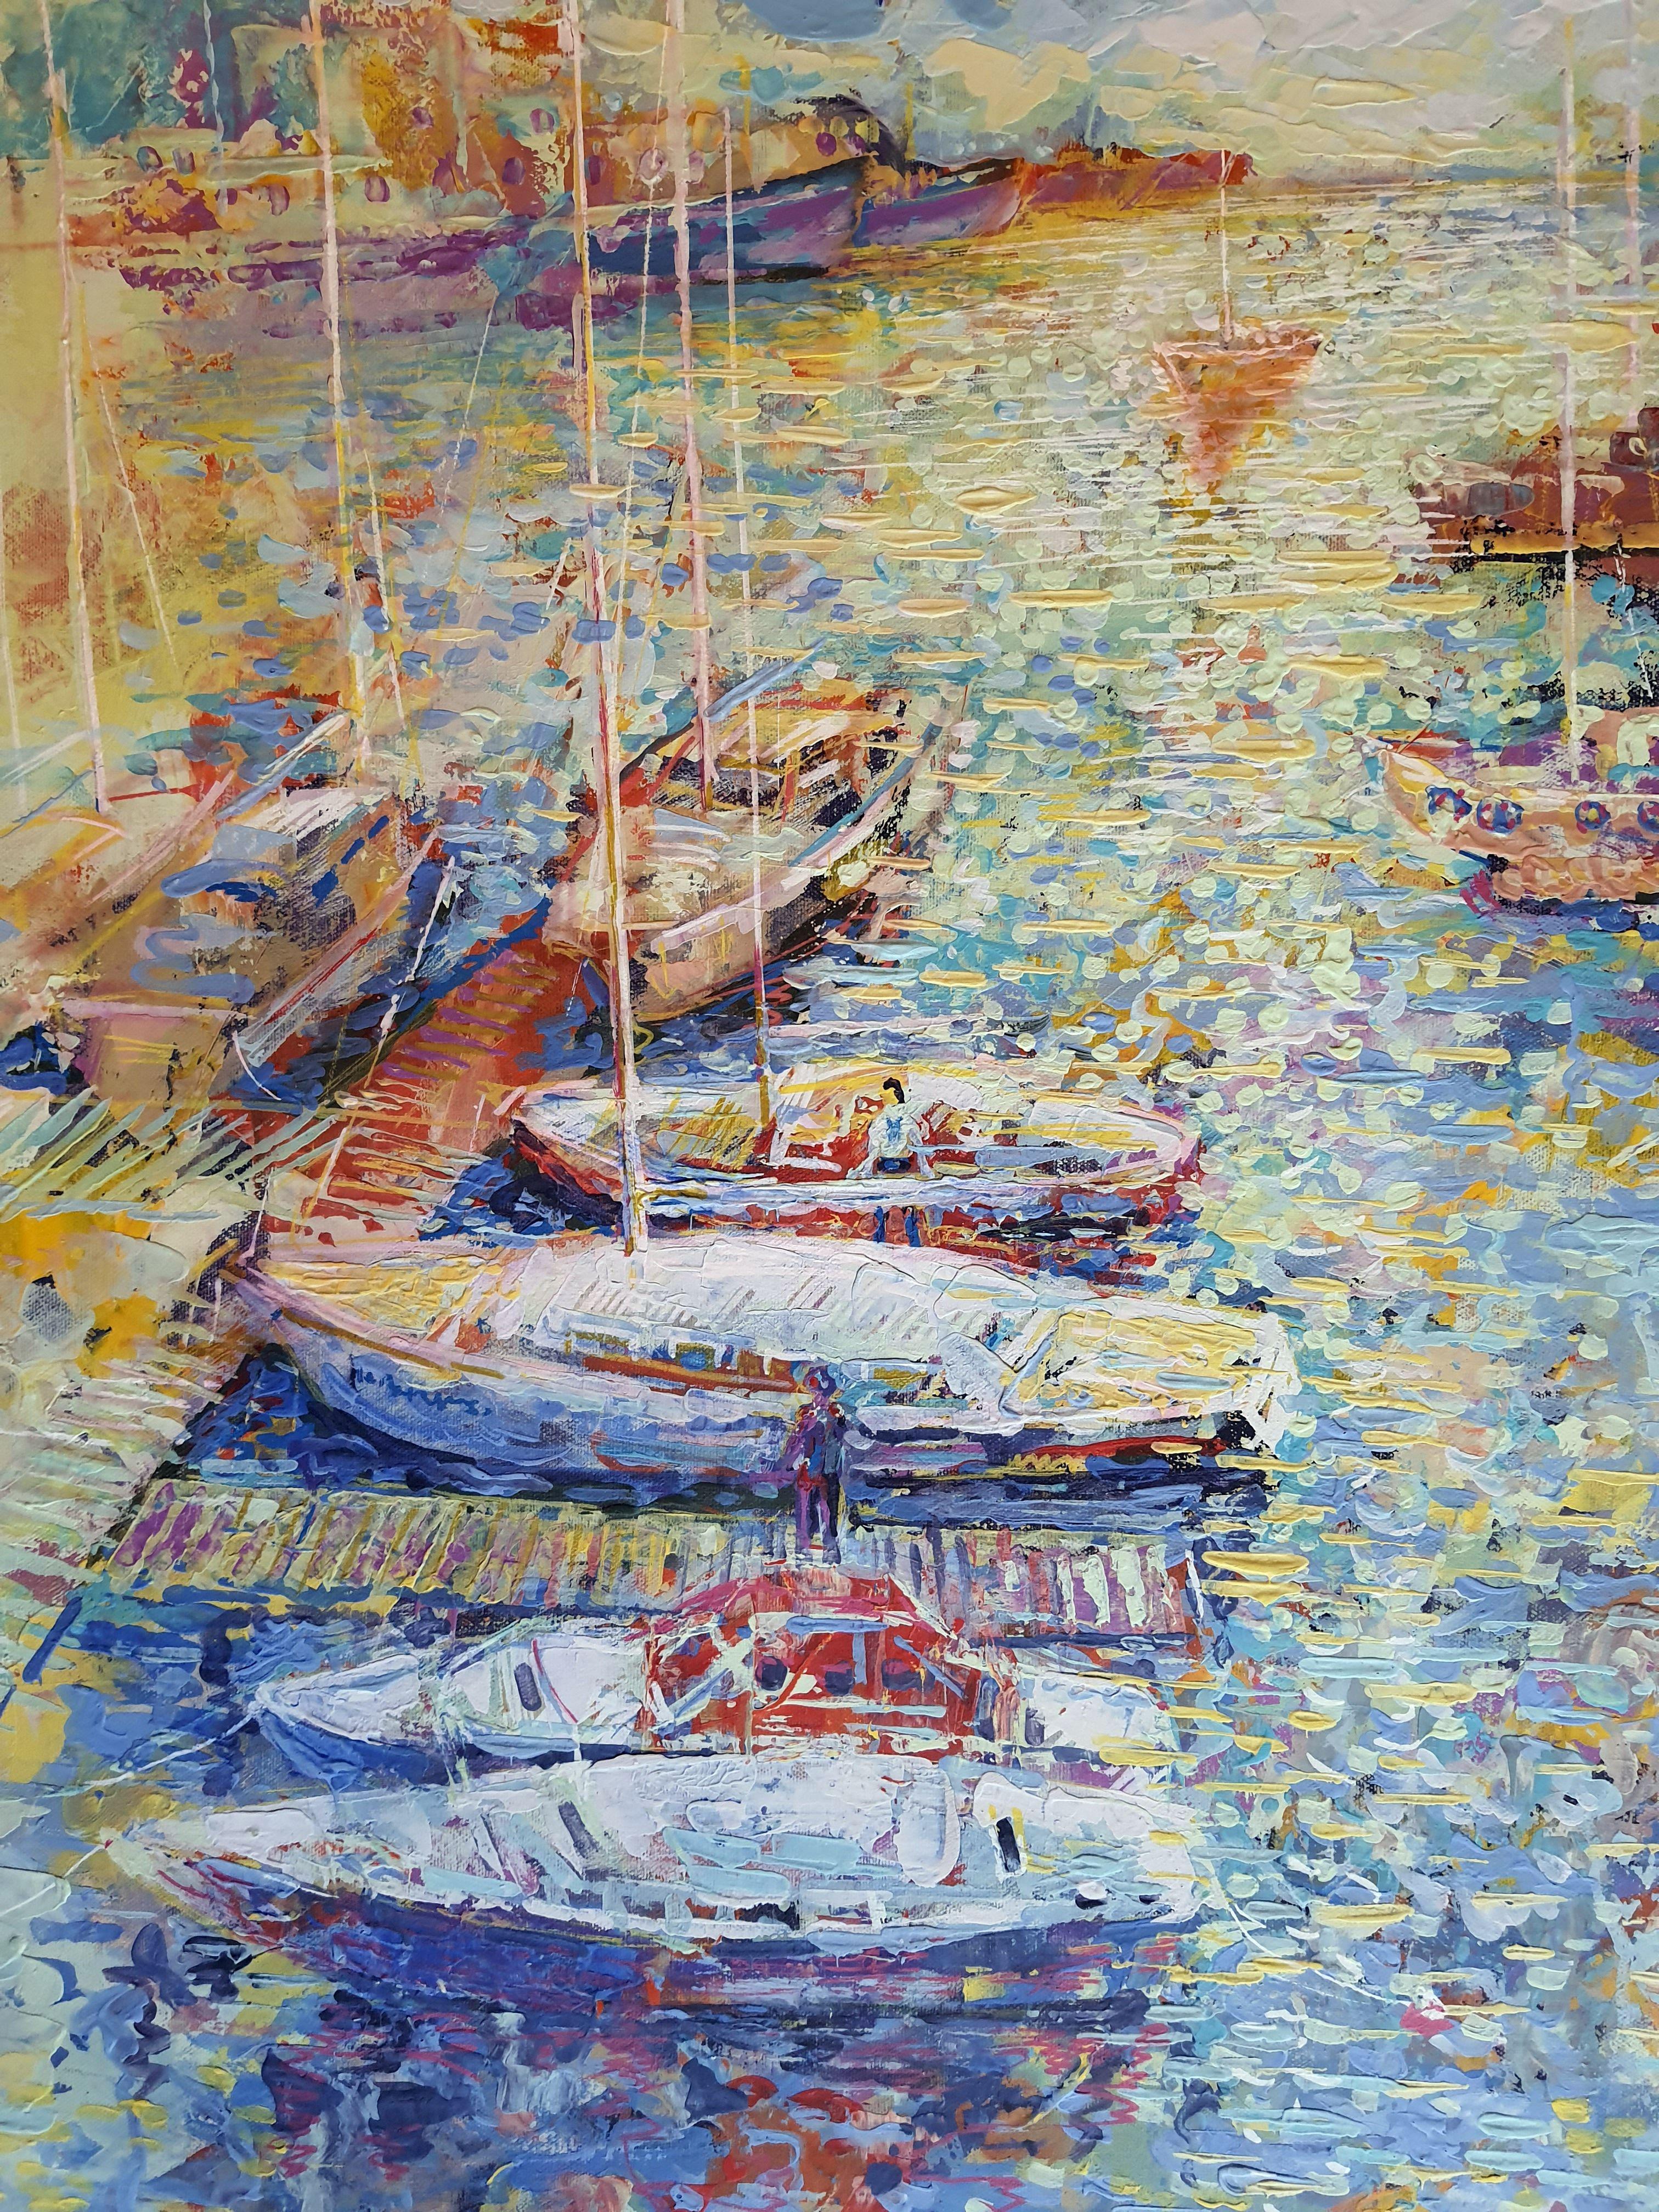 In this painting, I've passionately blended acrylic and oil to capture a serene harbor at the cusp of fall. The essence of expressionism and impressionism dance across the canvas, portraying the gentle sway of boats and the vibrant reflection of